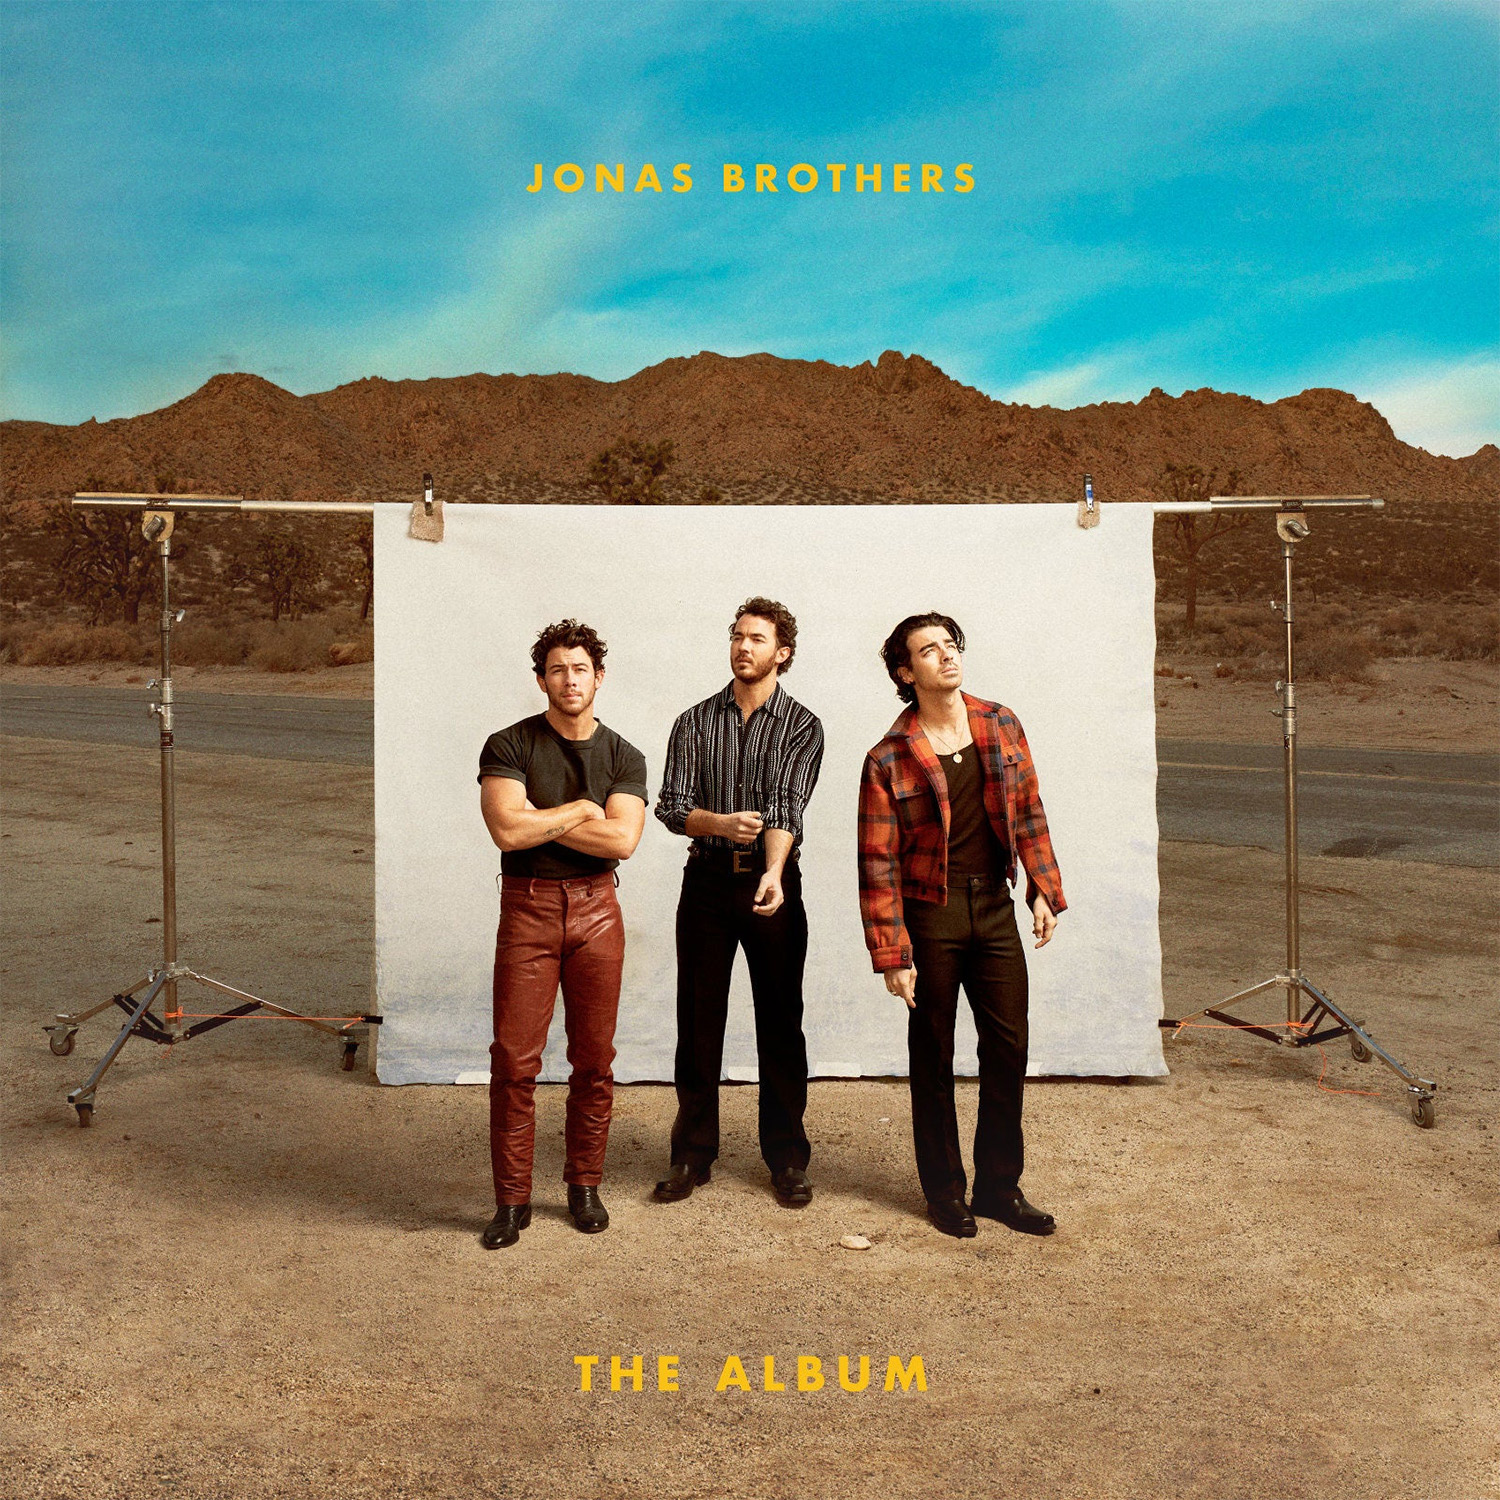 Artwork for ‘The Album’ by the Jonas Brothers